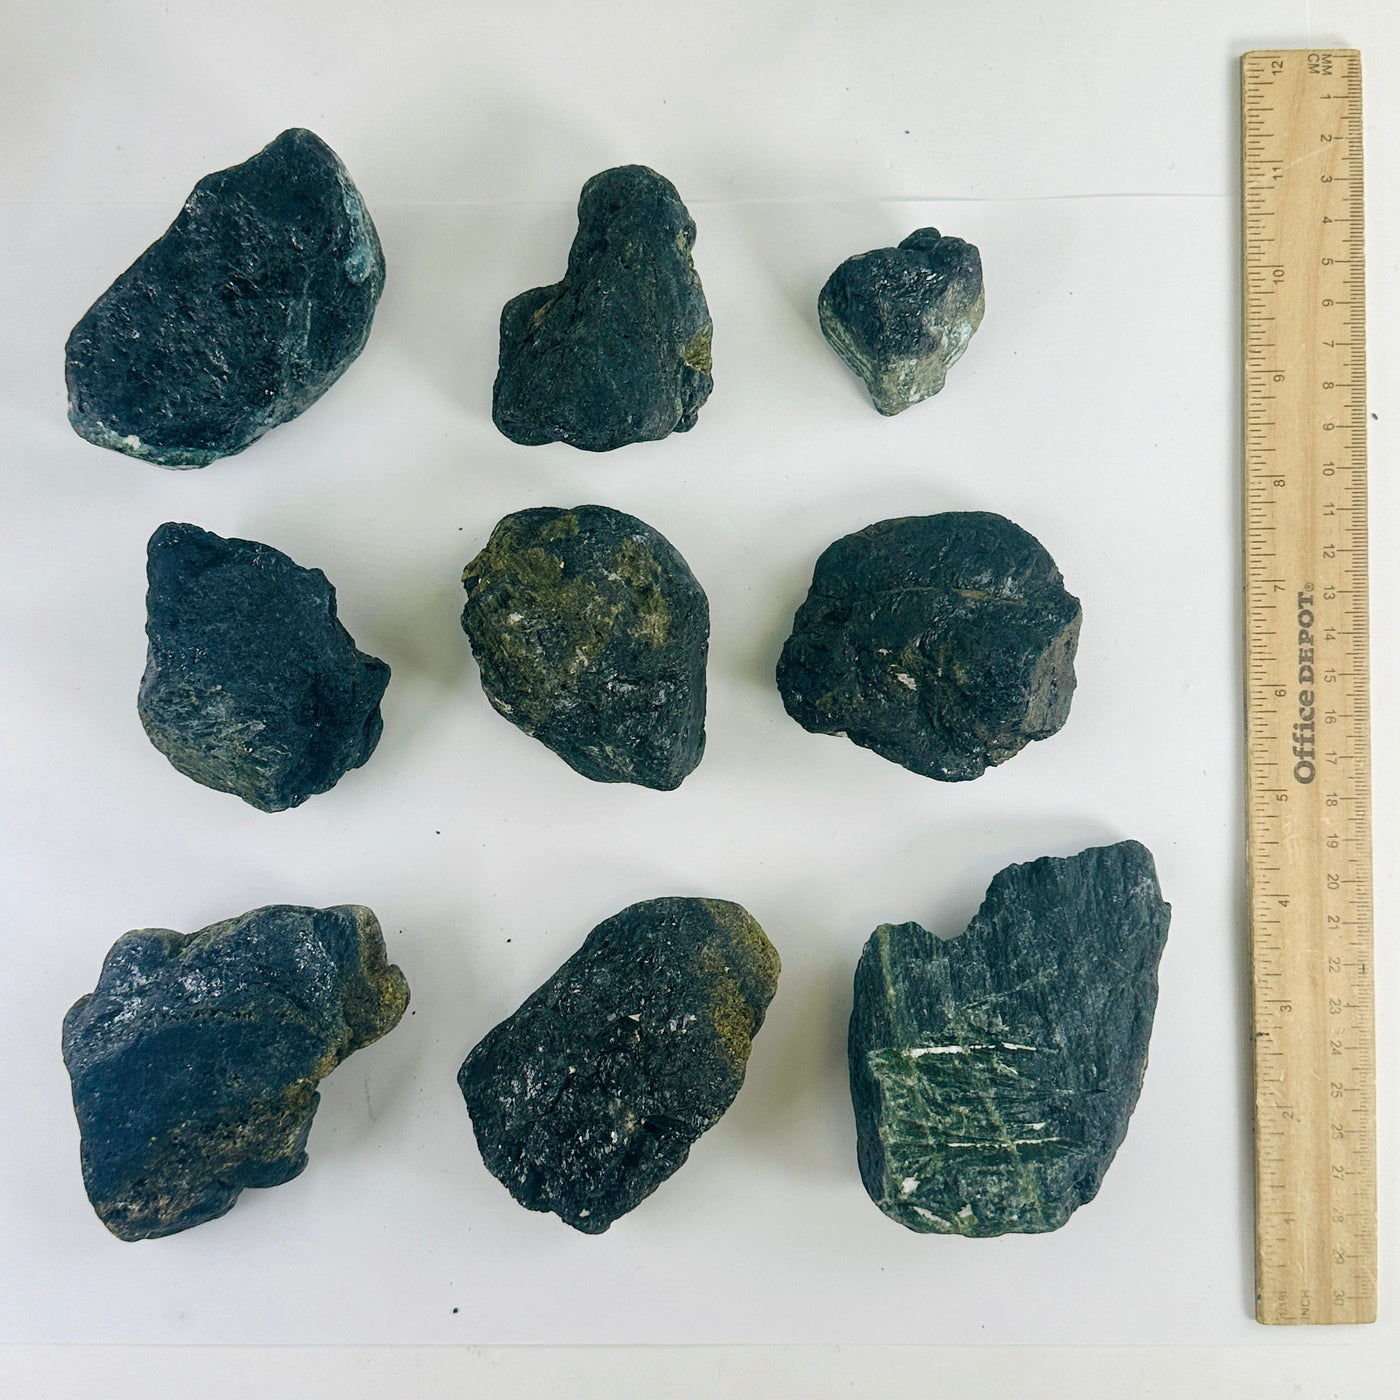 Green Tourmaline - Rough Stone - You Choose all variants with ruler for size reference